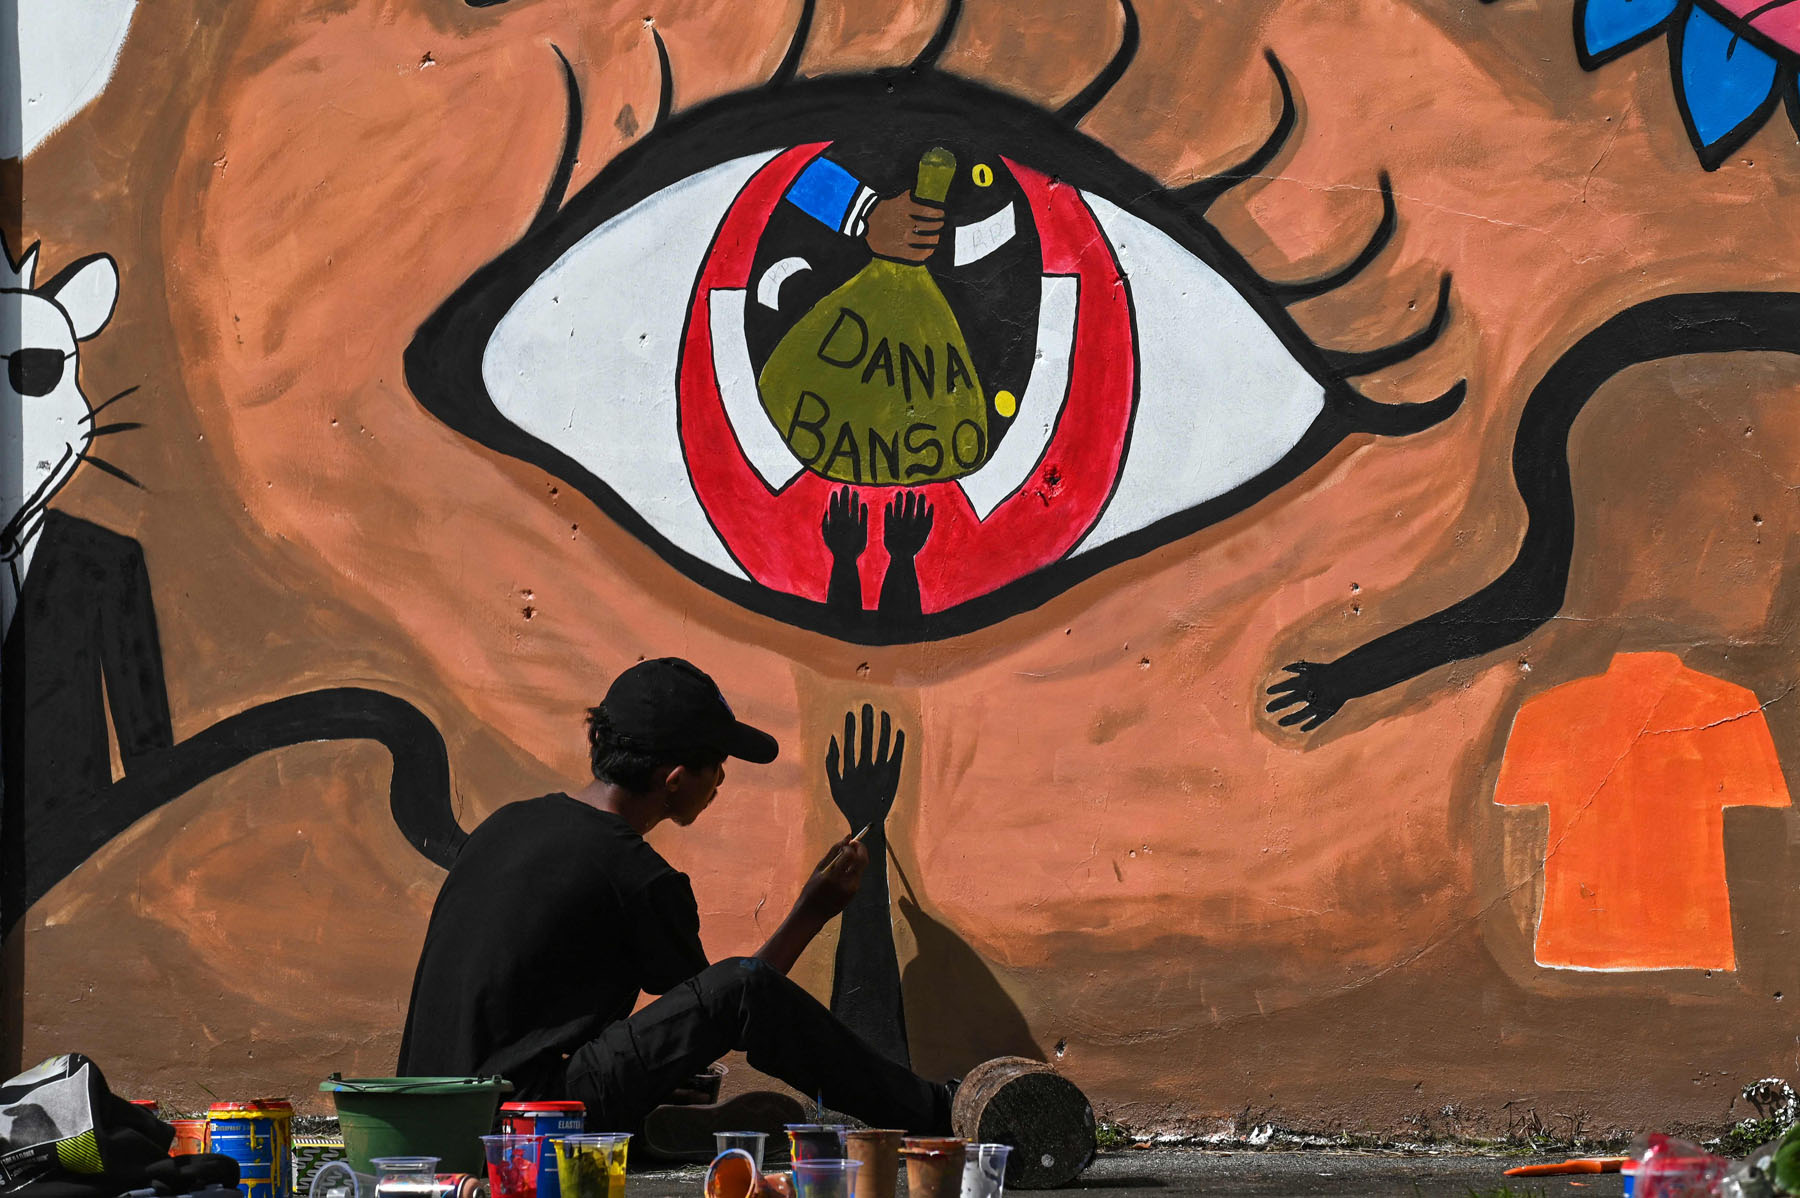 A participant paints a wall during a mural festival ahead of commemorations for the 76th anniversary of the Indonesian police corps in Banda Aceh on June 18, 2022. (Photo by CHAIDEER MAHYUDDIN / AFP)